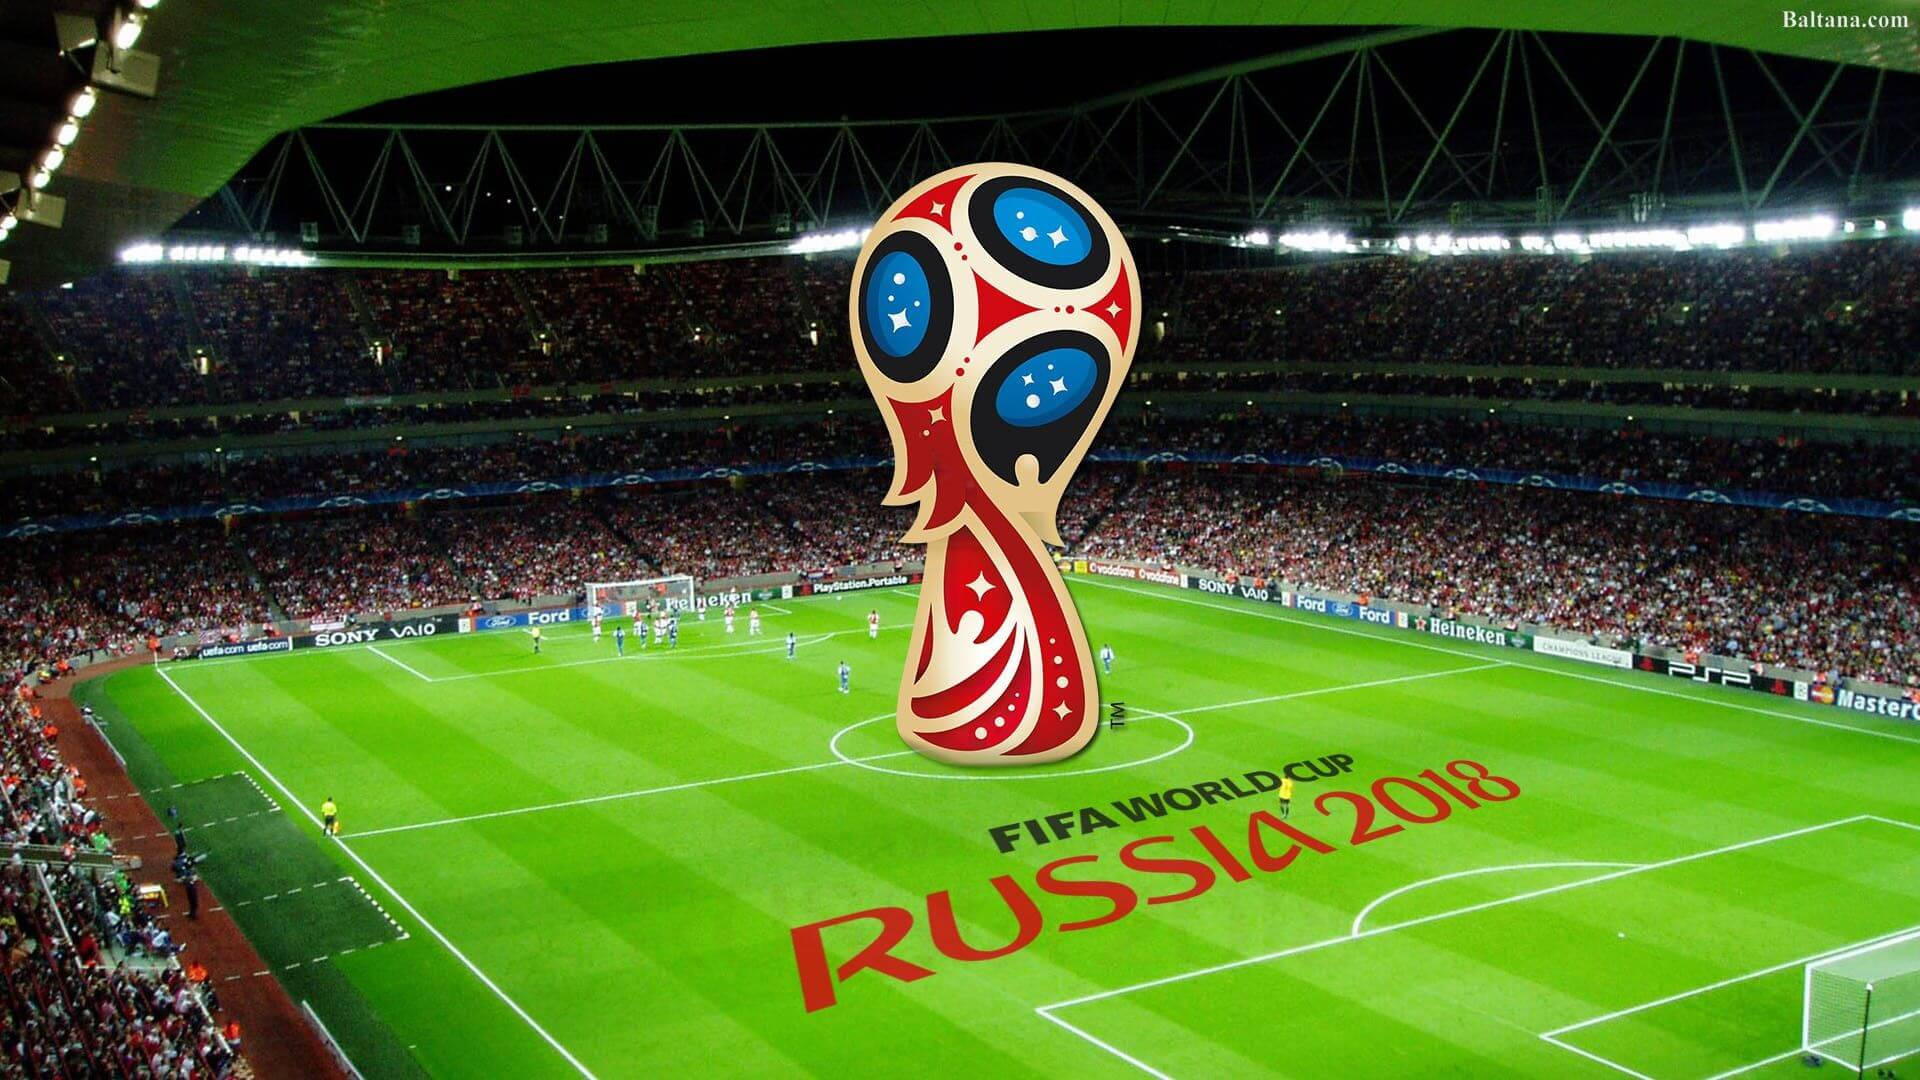 Fifa World Cup 2018 In Russia Background